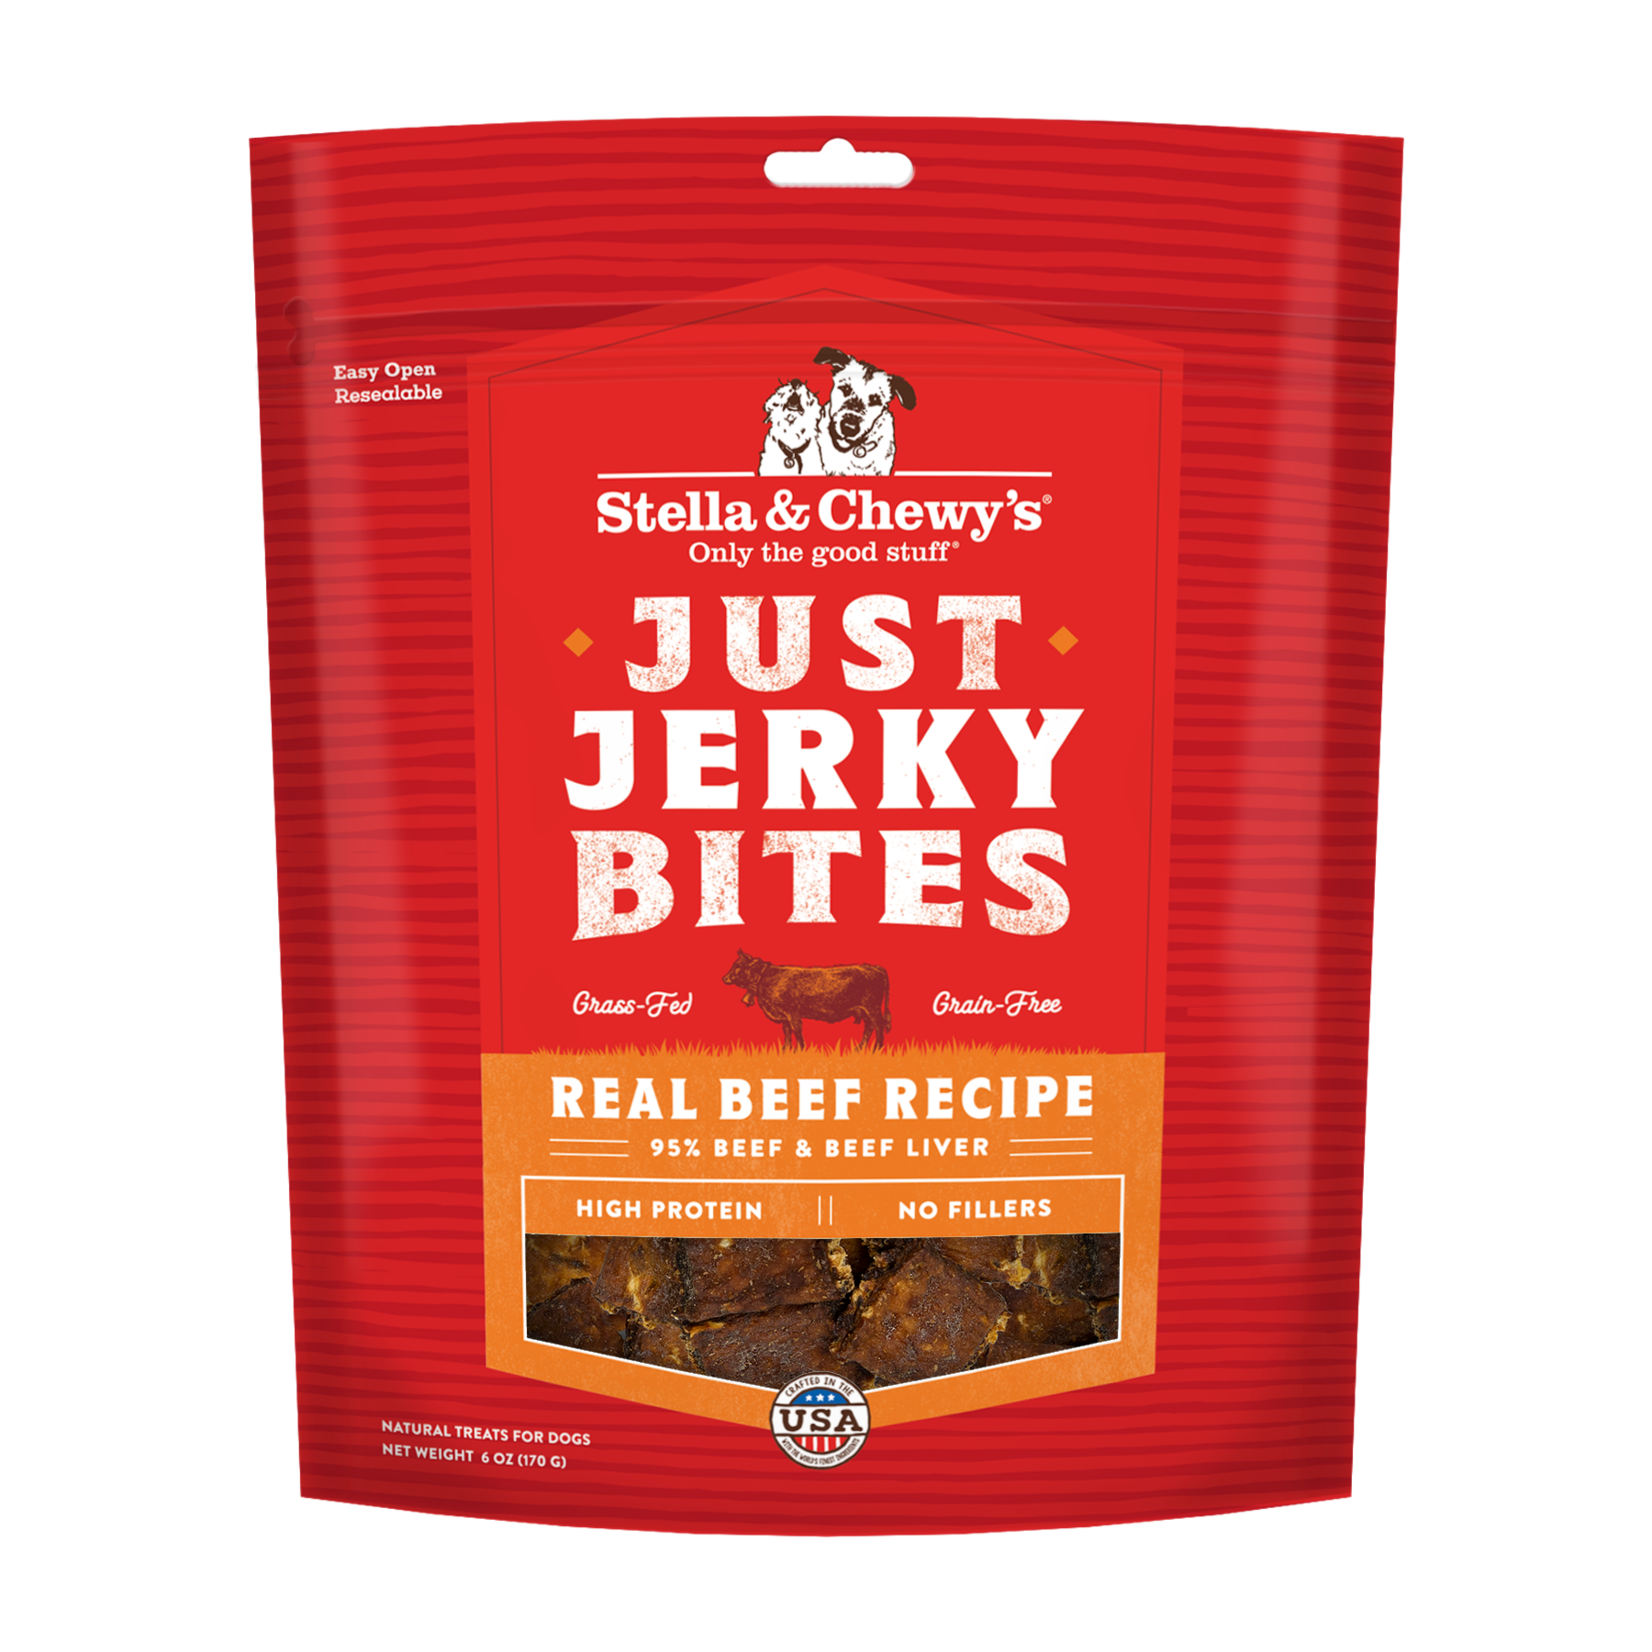 Stella & Chewy’s Just Jerky Bites - Beef Recipe